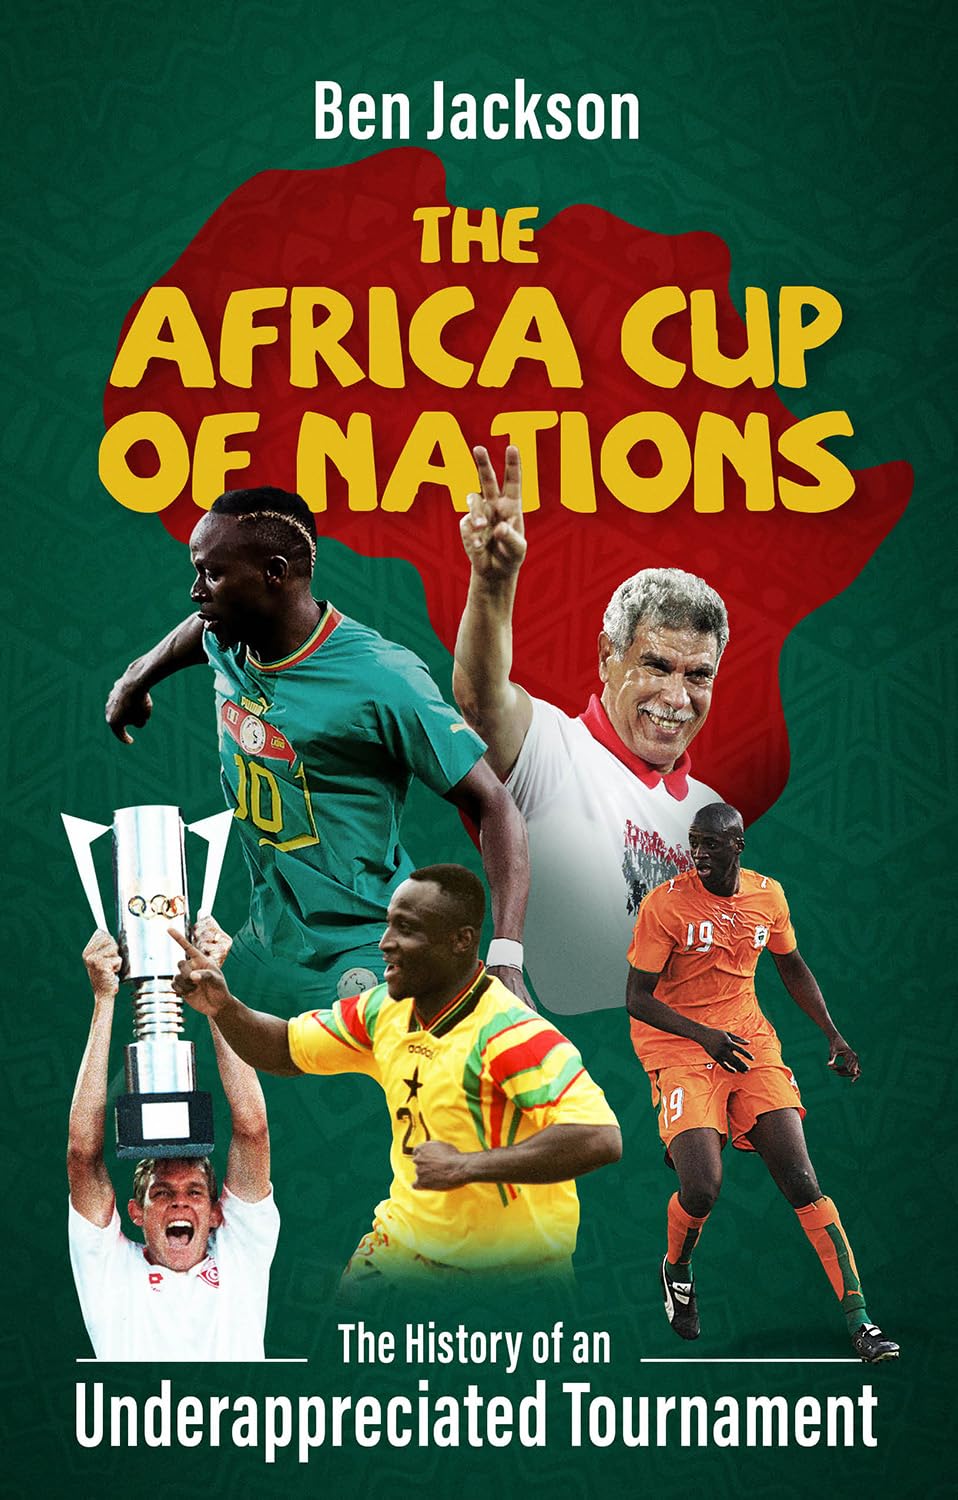 Podcast: The Africa Cup of Nations